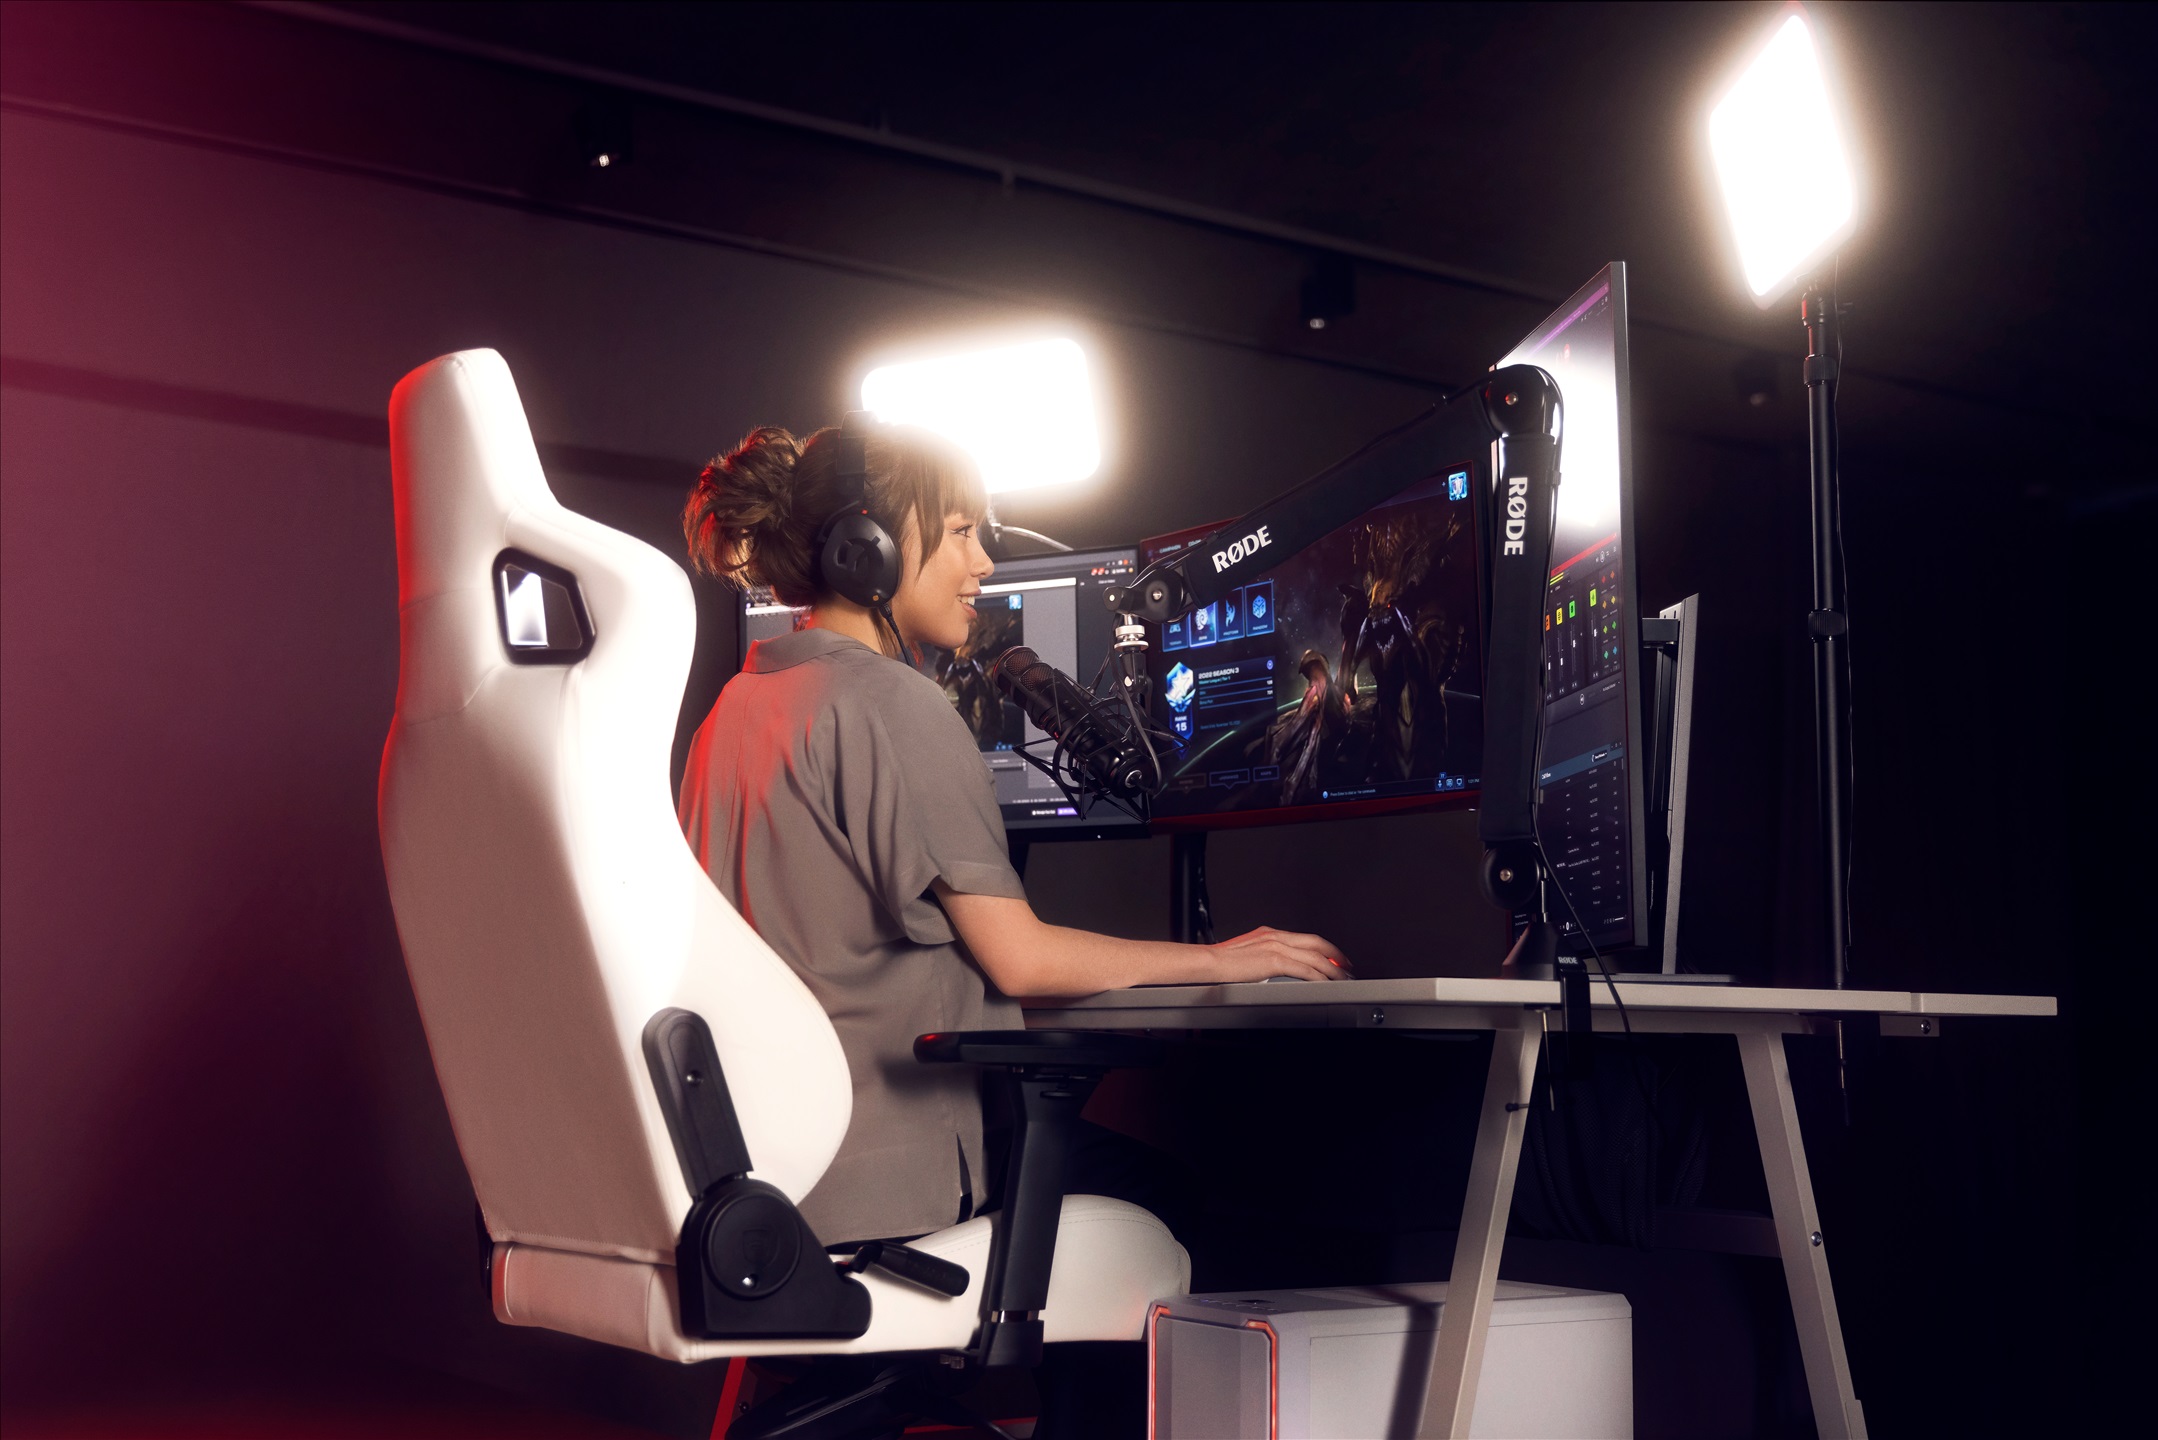 RODE launches new sub-brand RODE X, with two new microphones for streamers and gamers